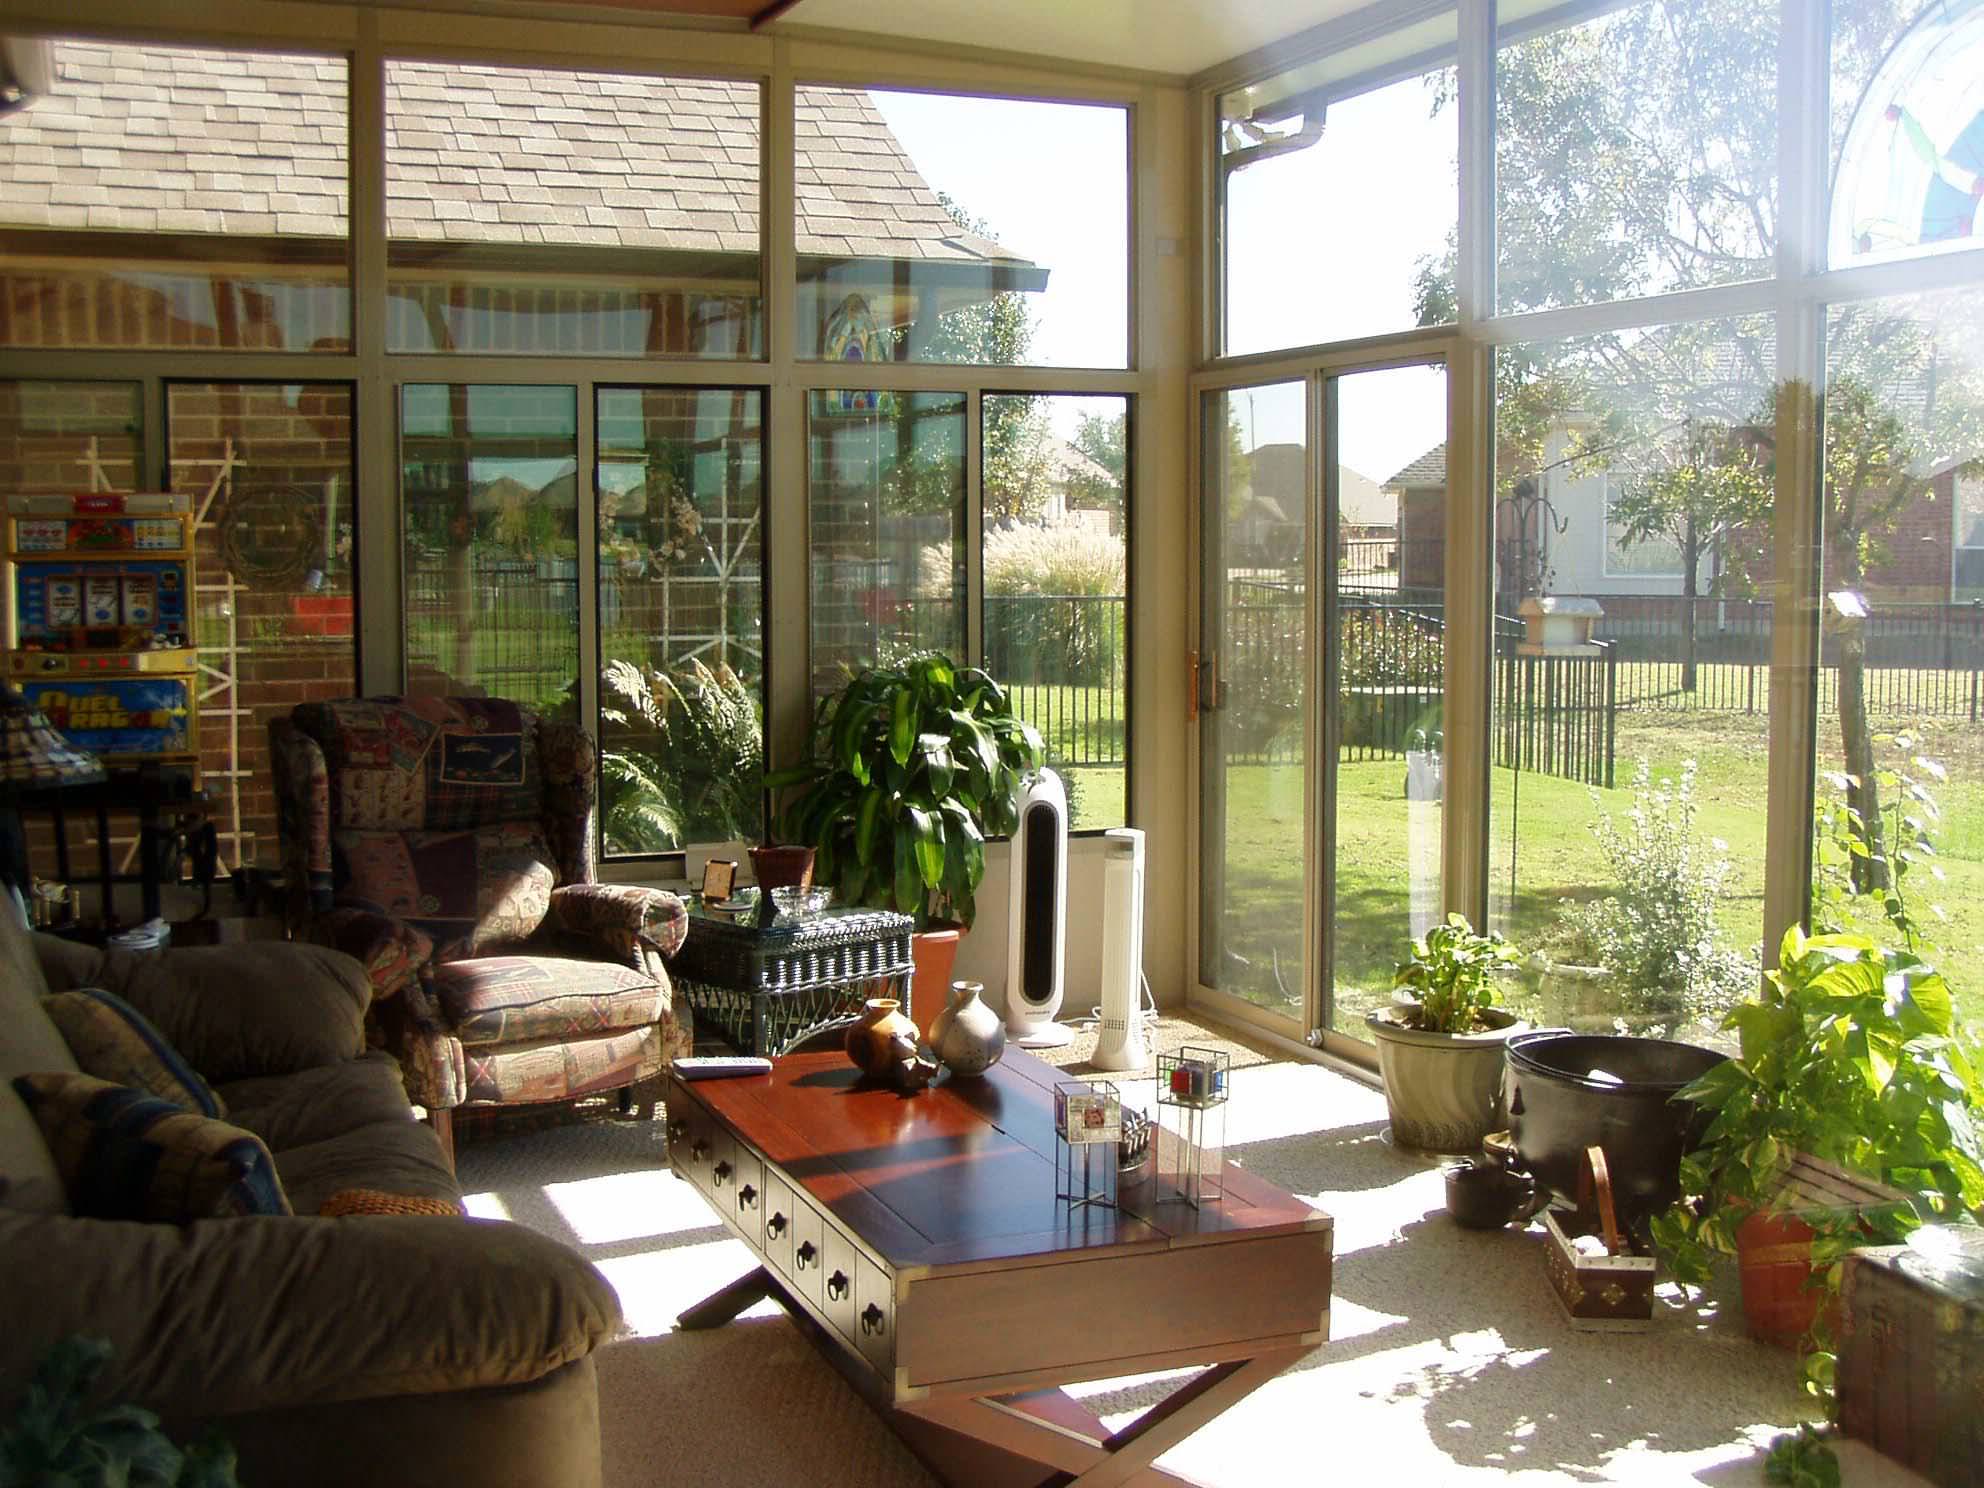 Sunroom Pictures Gallery